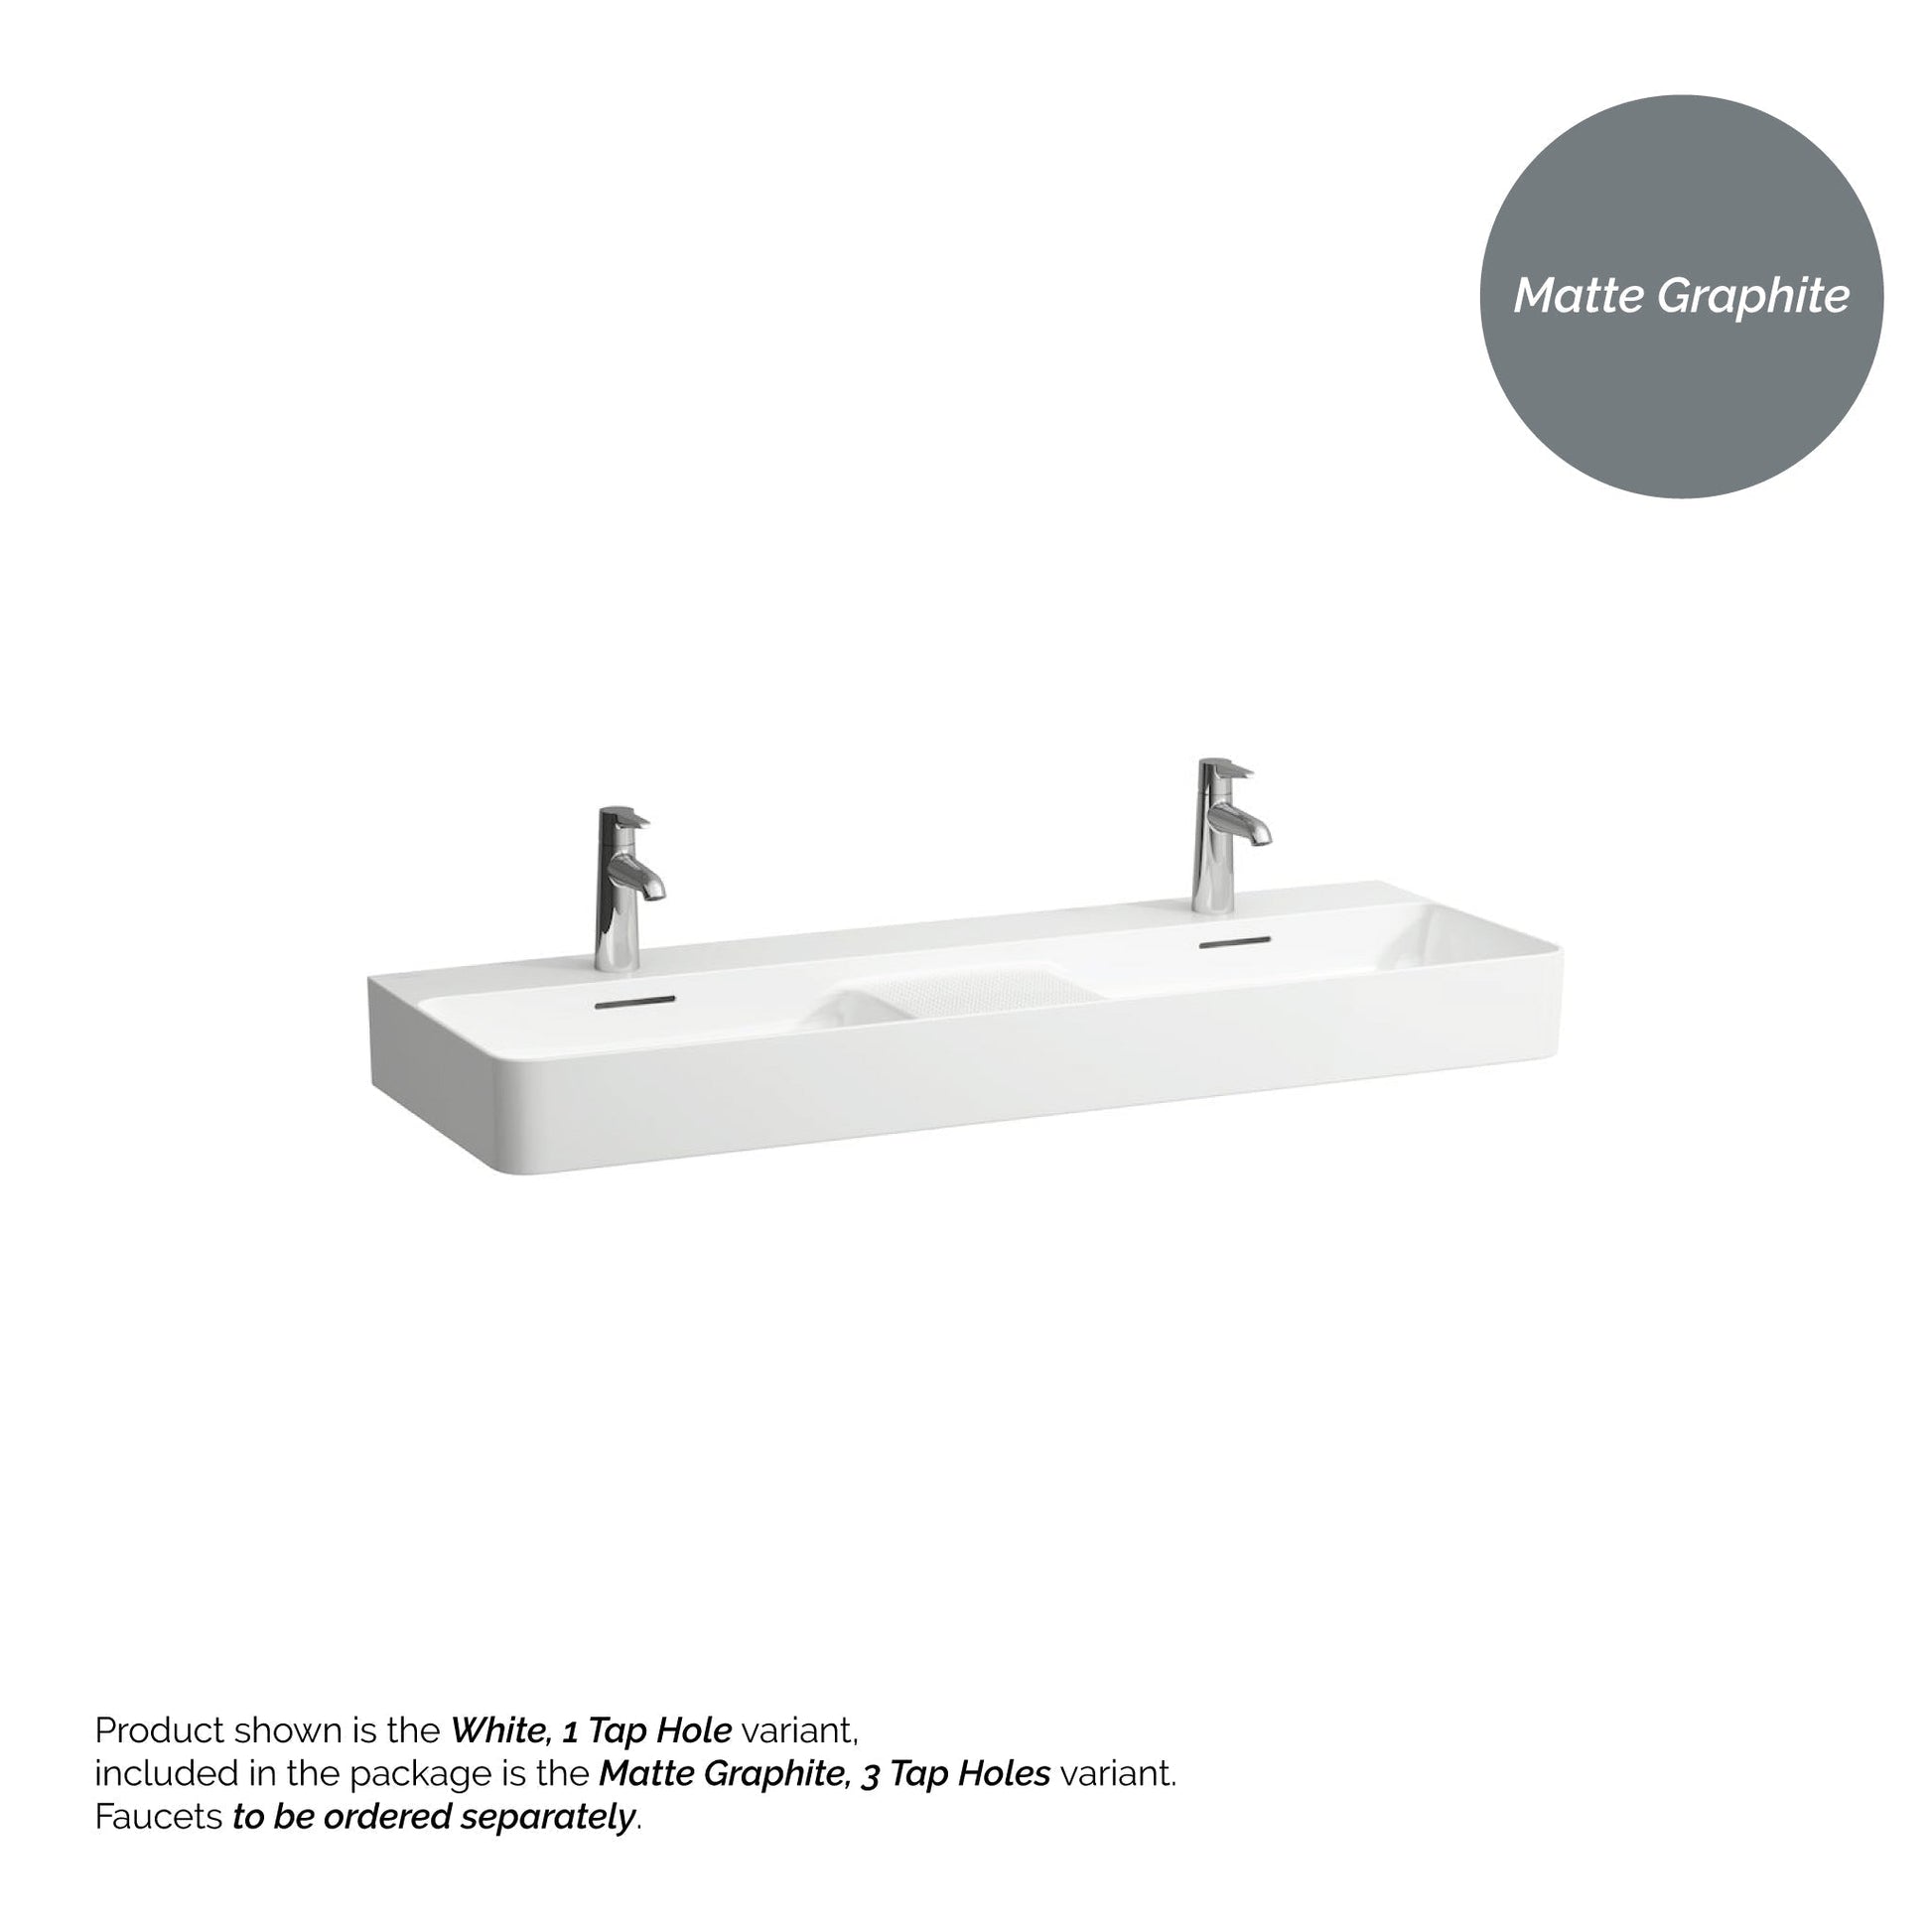 Laufen Val 47" x 17" Matte Graphite Ceramic Wall-Mounted Double Bathroom Sink With 6 Faucet Holes